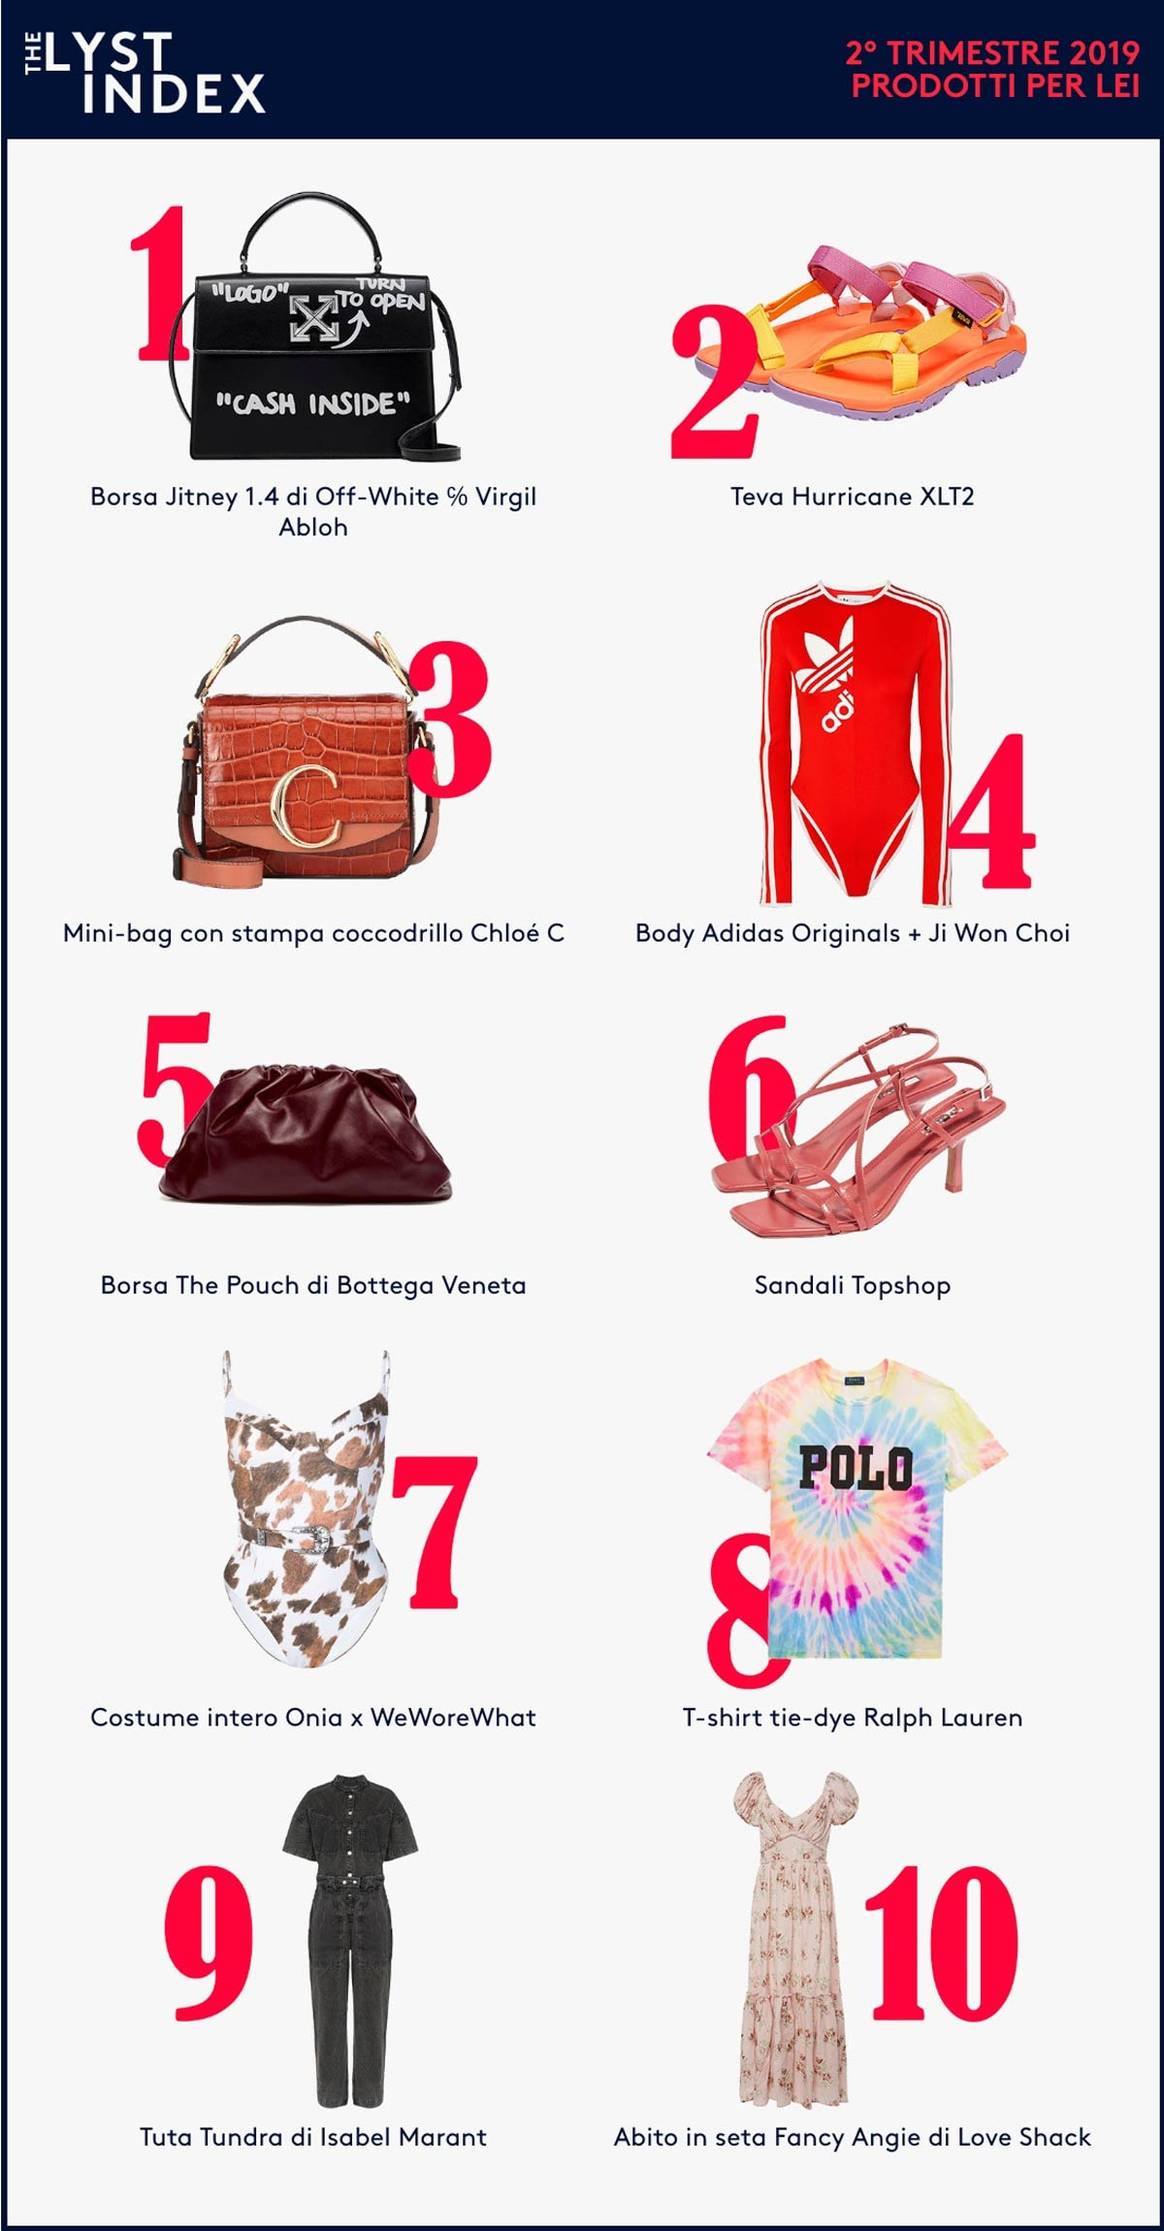 Gucci named "hottest brand" of 2019 Q2